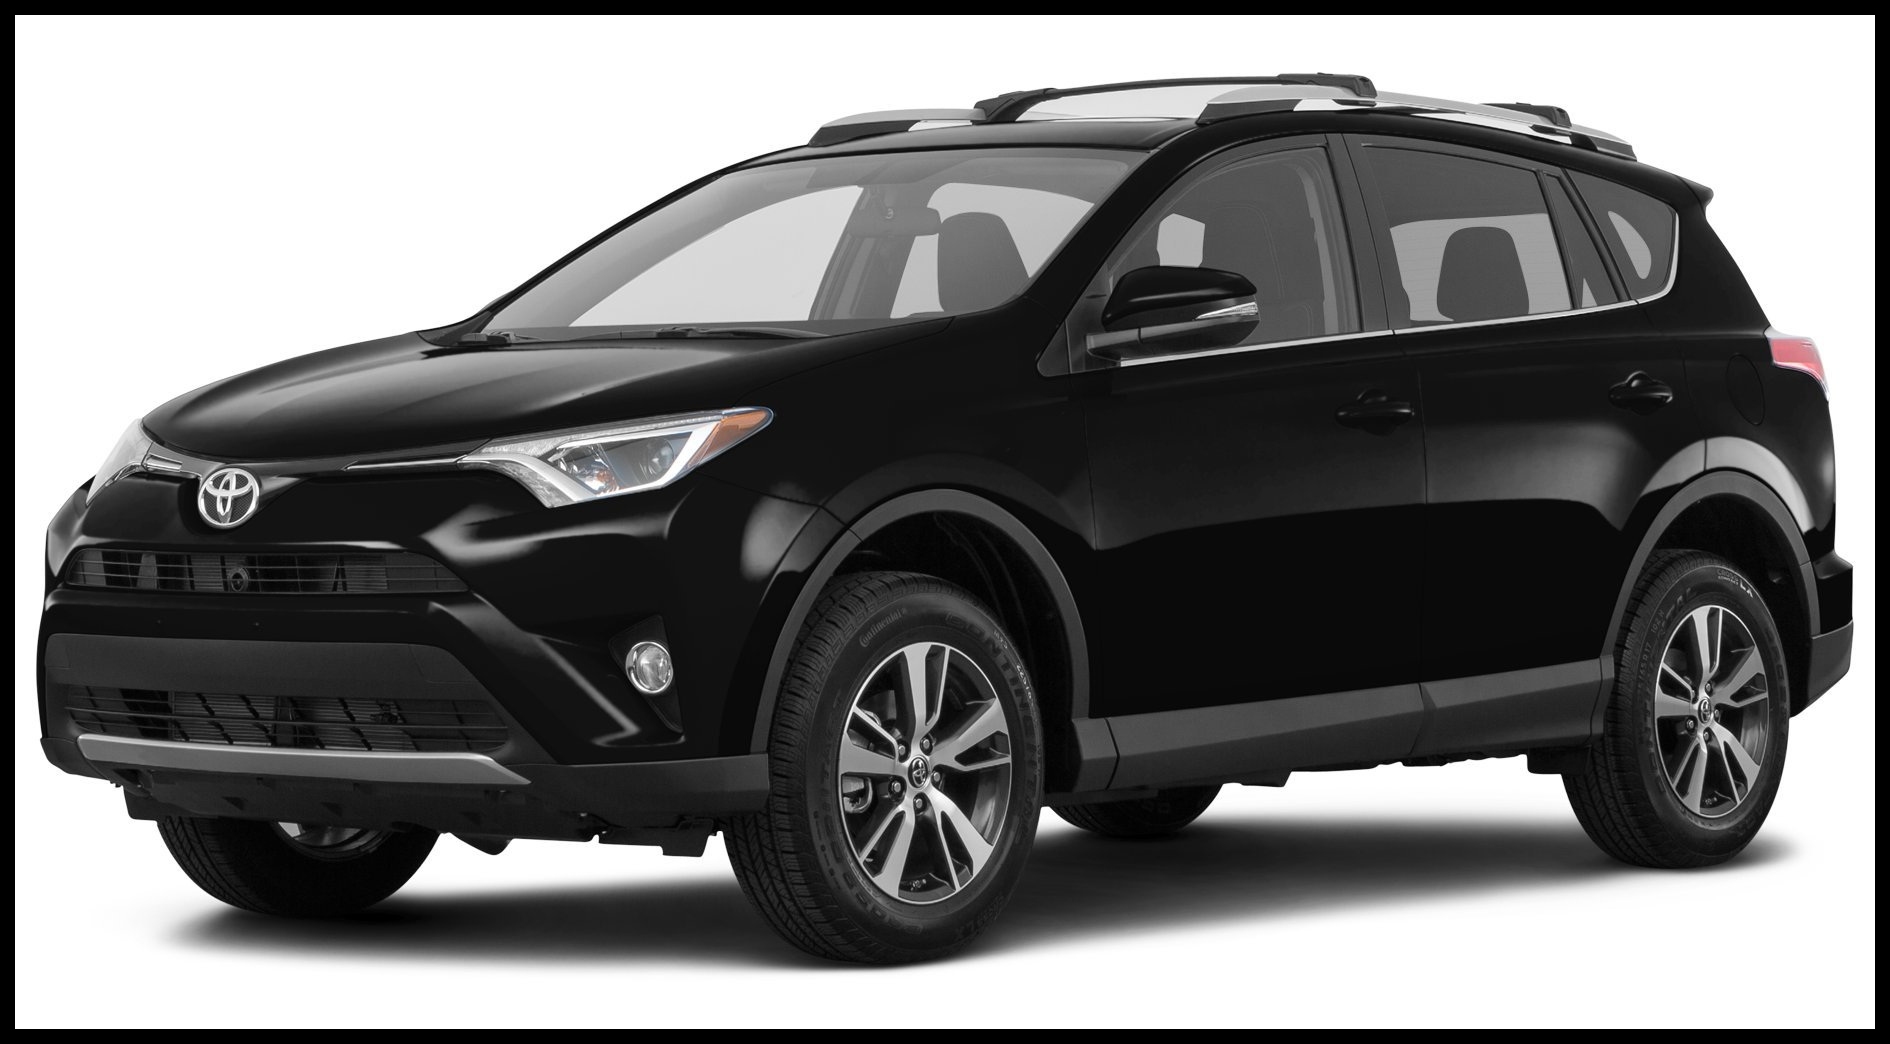 New Amazon 2018 toyota Rav4 Reviews and Specs Vehicles Specs and Review